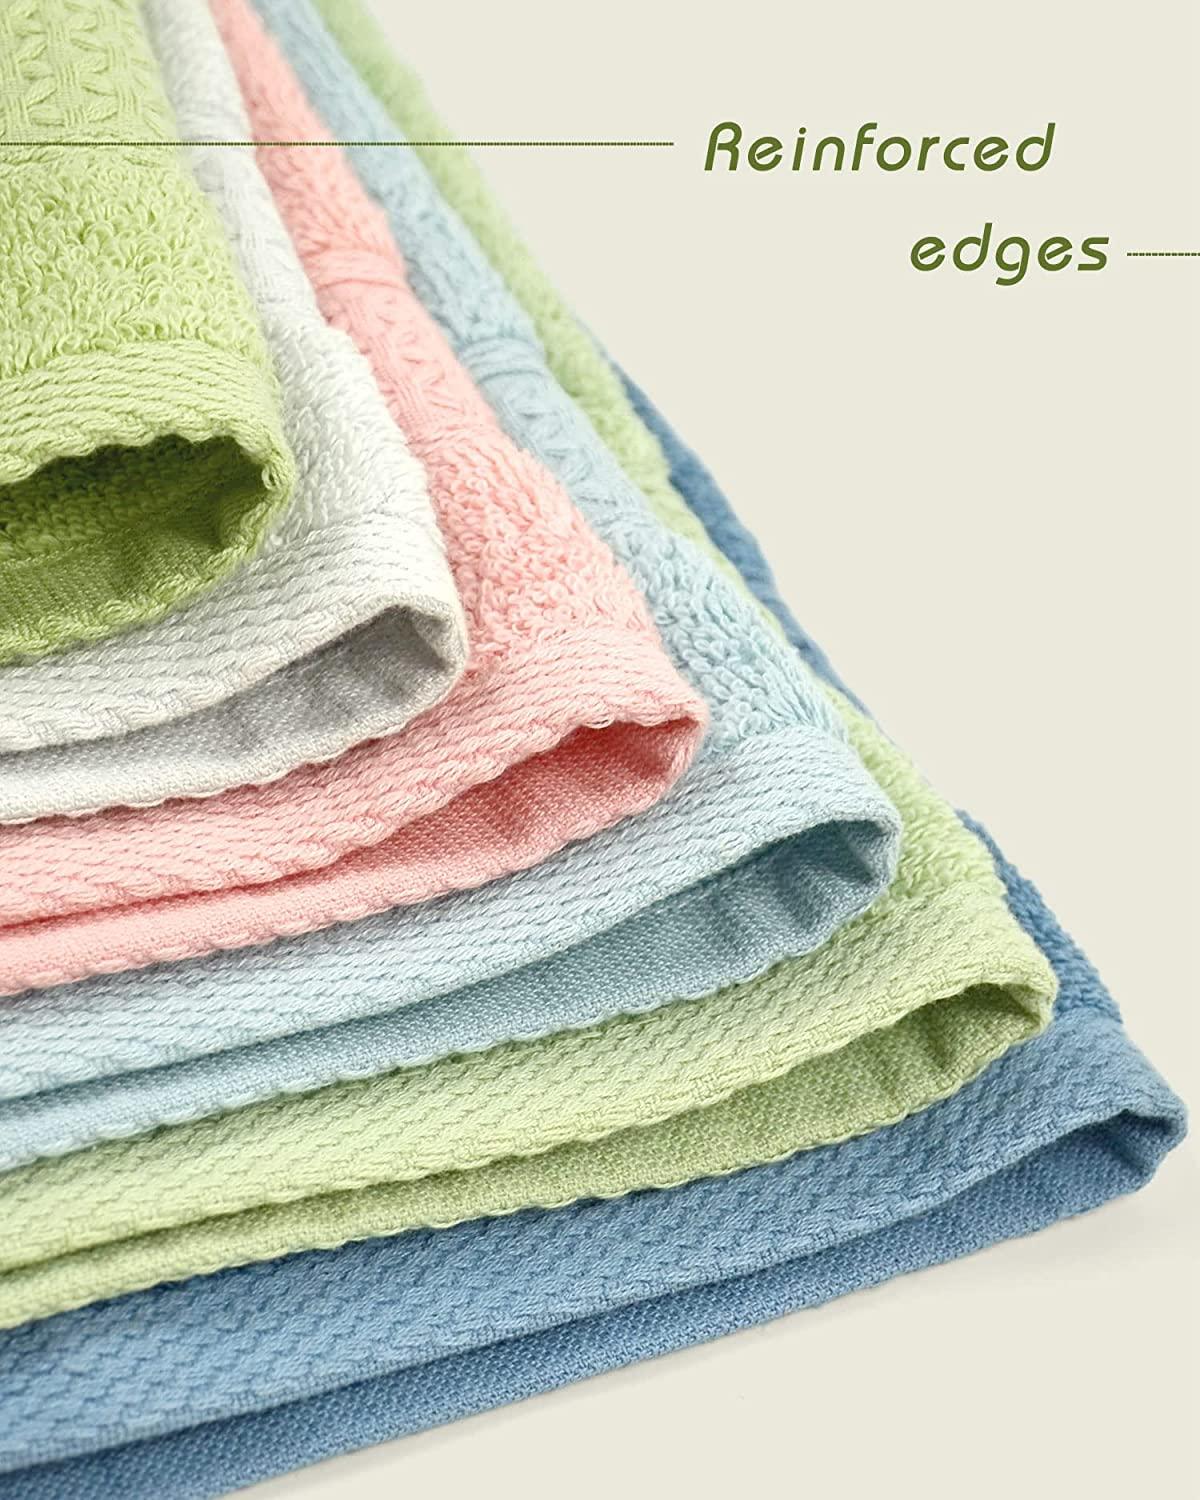 Cleanbear Cotton Hand Towel Set 6-Pack Hand Towels with Assorted Color